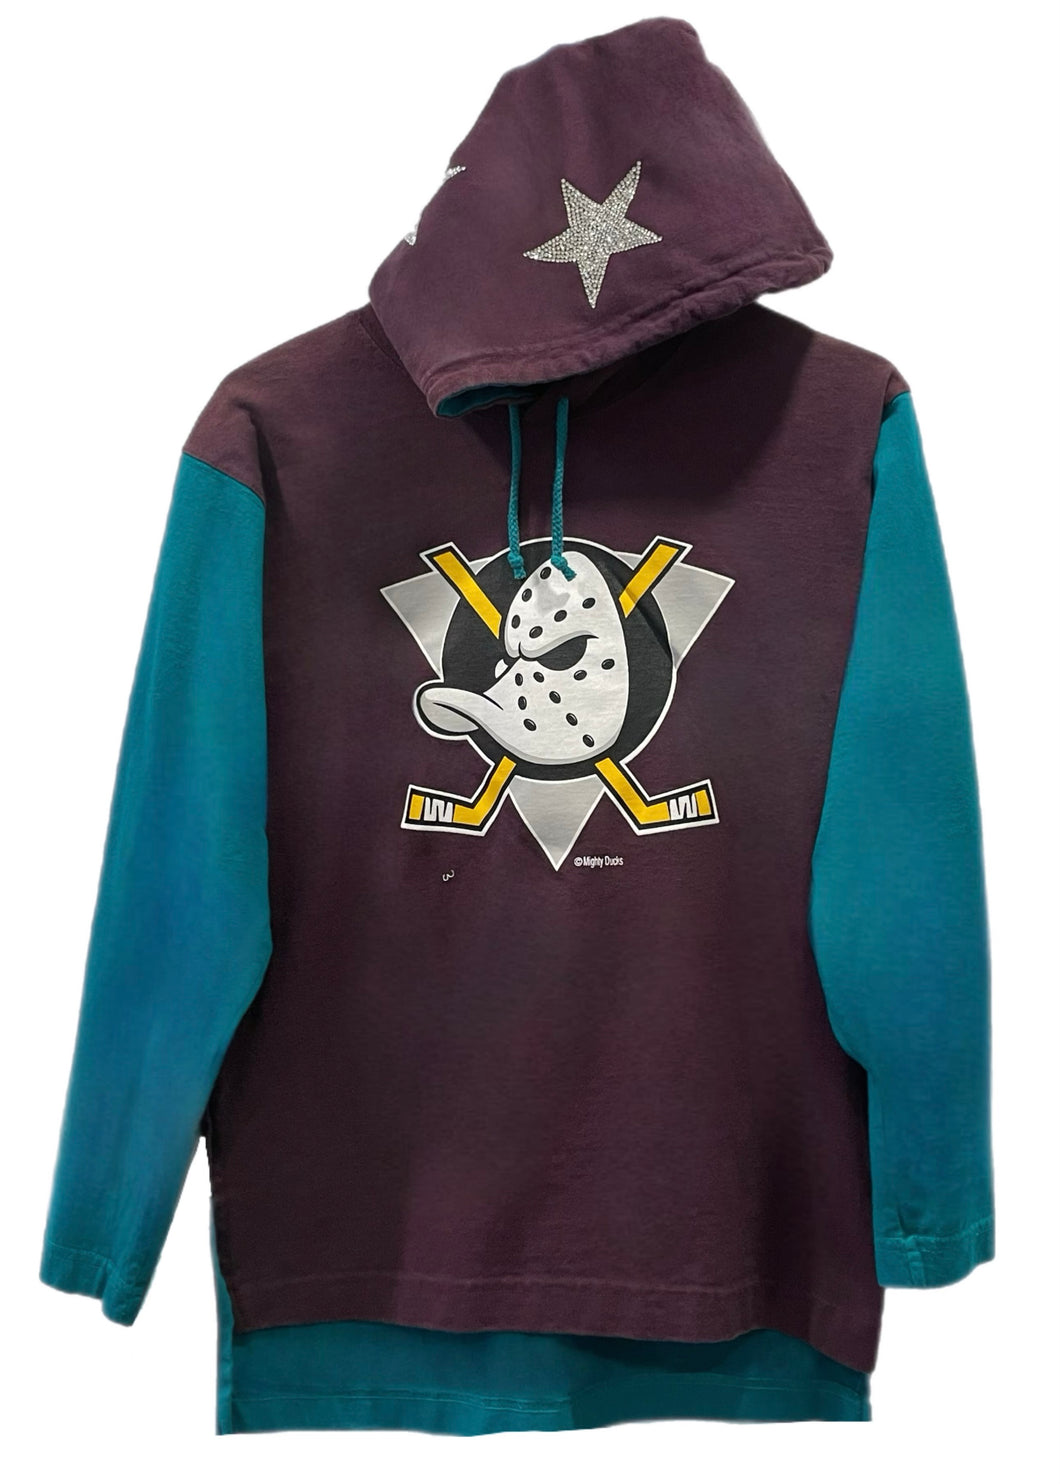 Anaheim Ducks, NHL One of a KIND Vintage “Mighty Ducks” Hoodie with Crystal Star Design on Hood - Size: Small